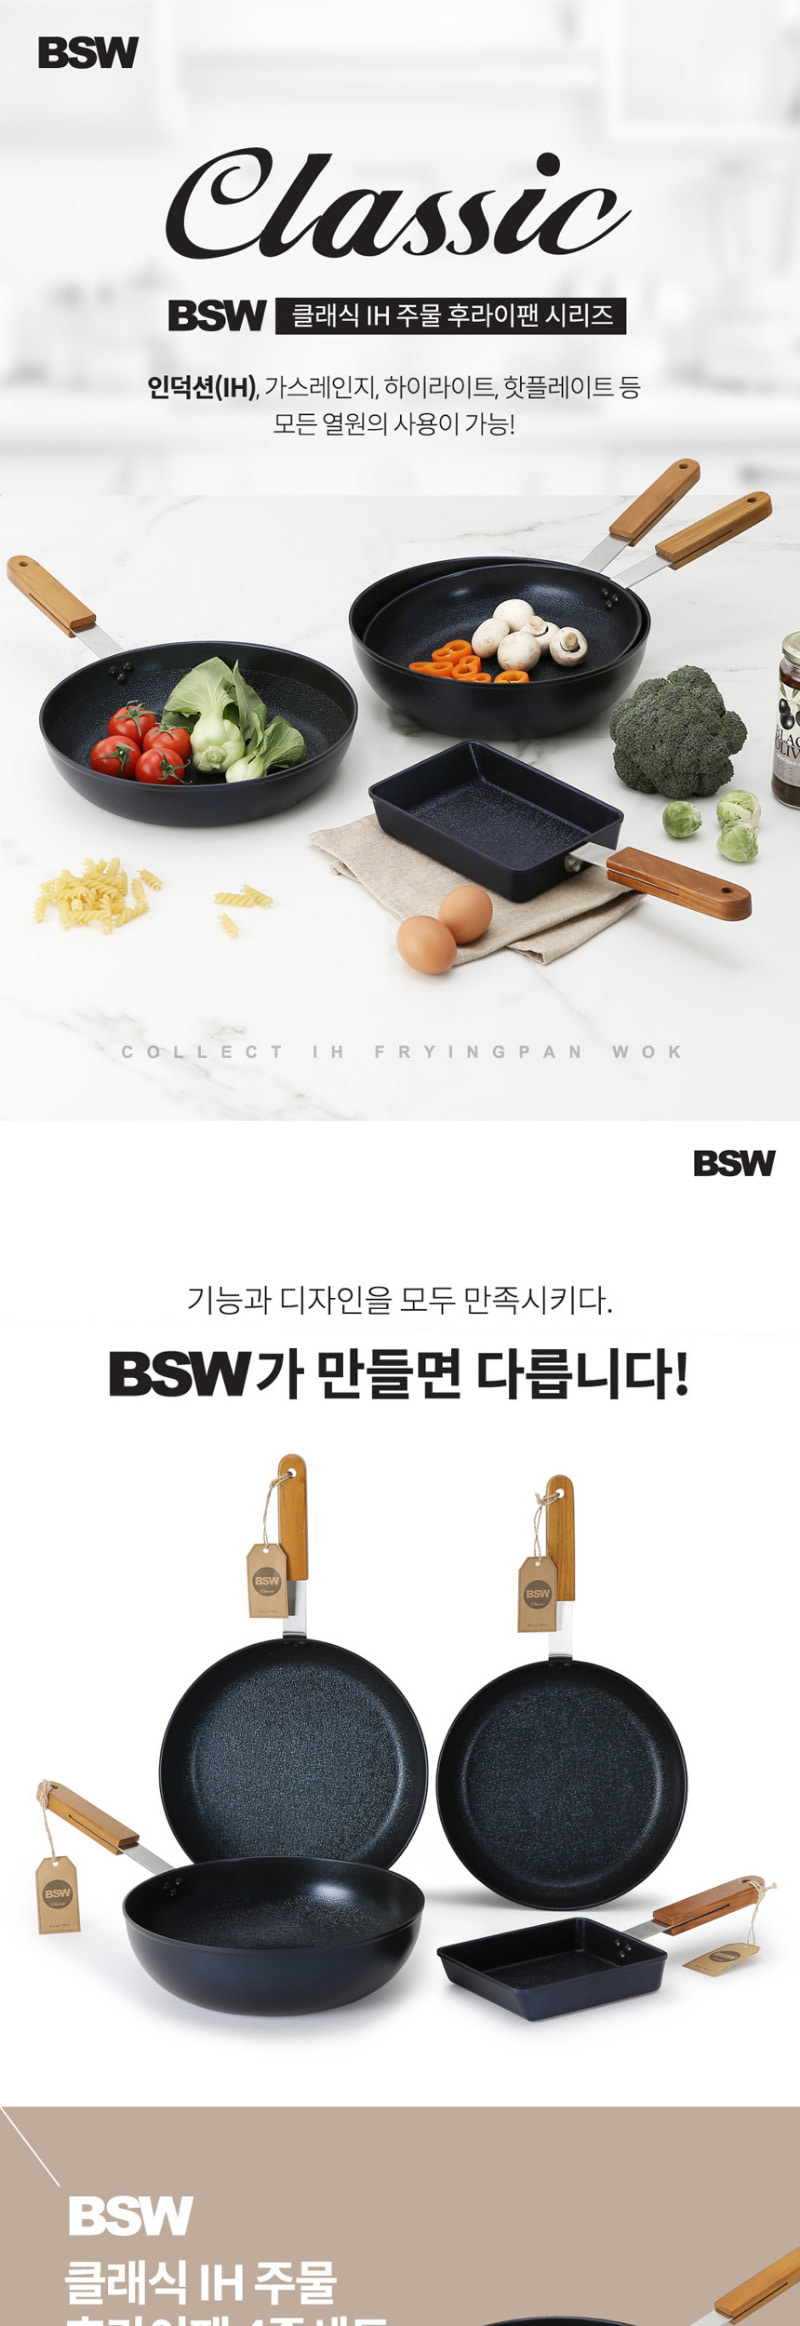 BSW프라이팬